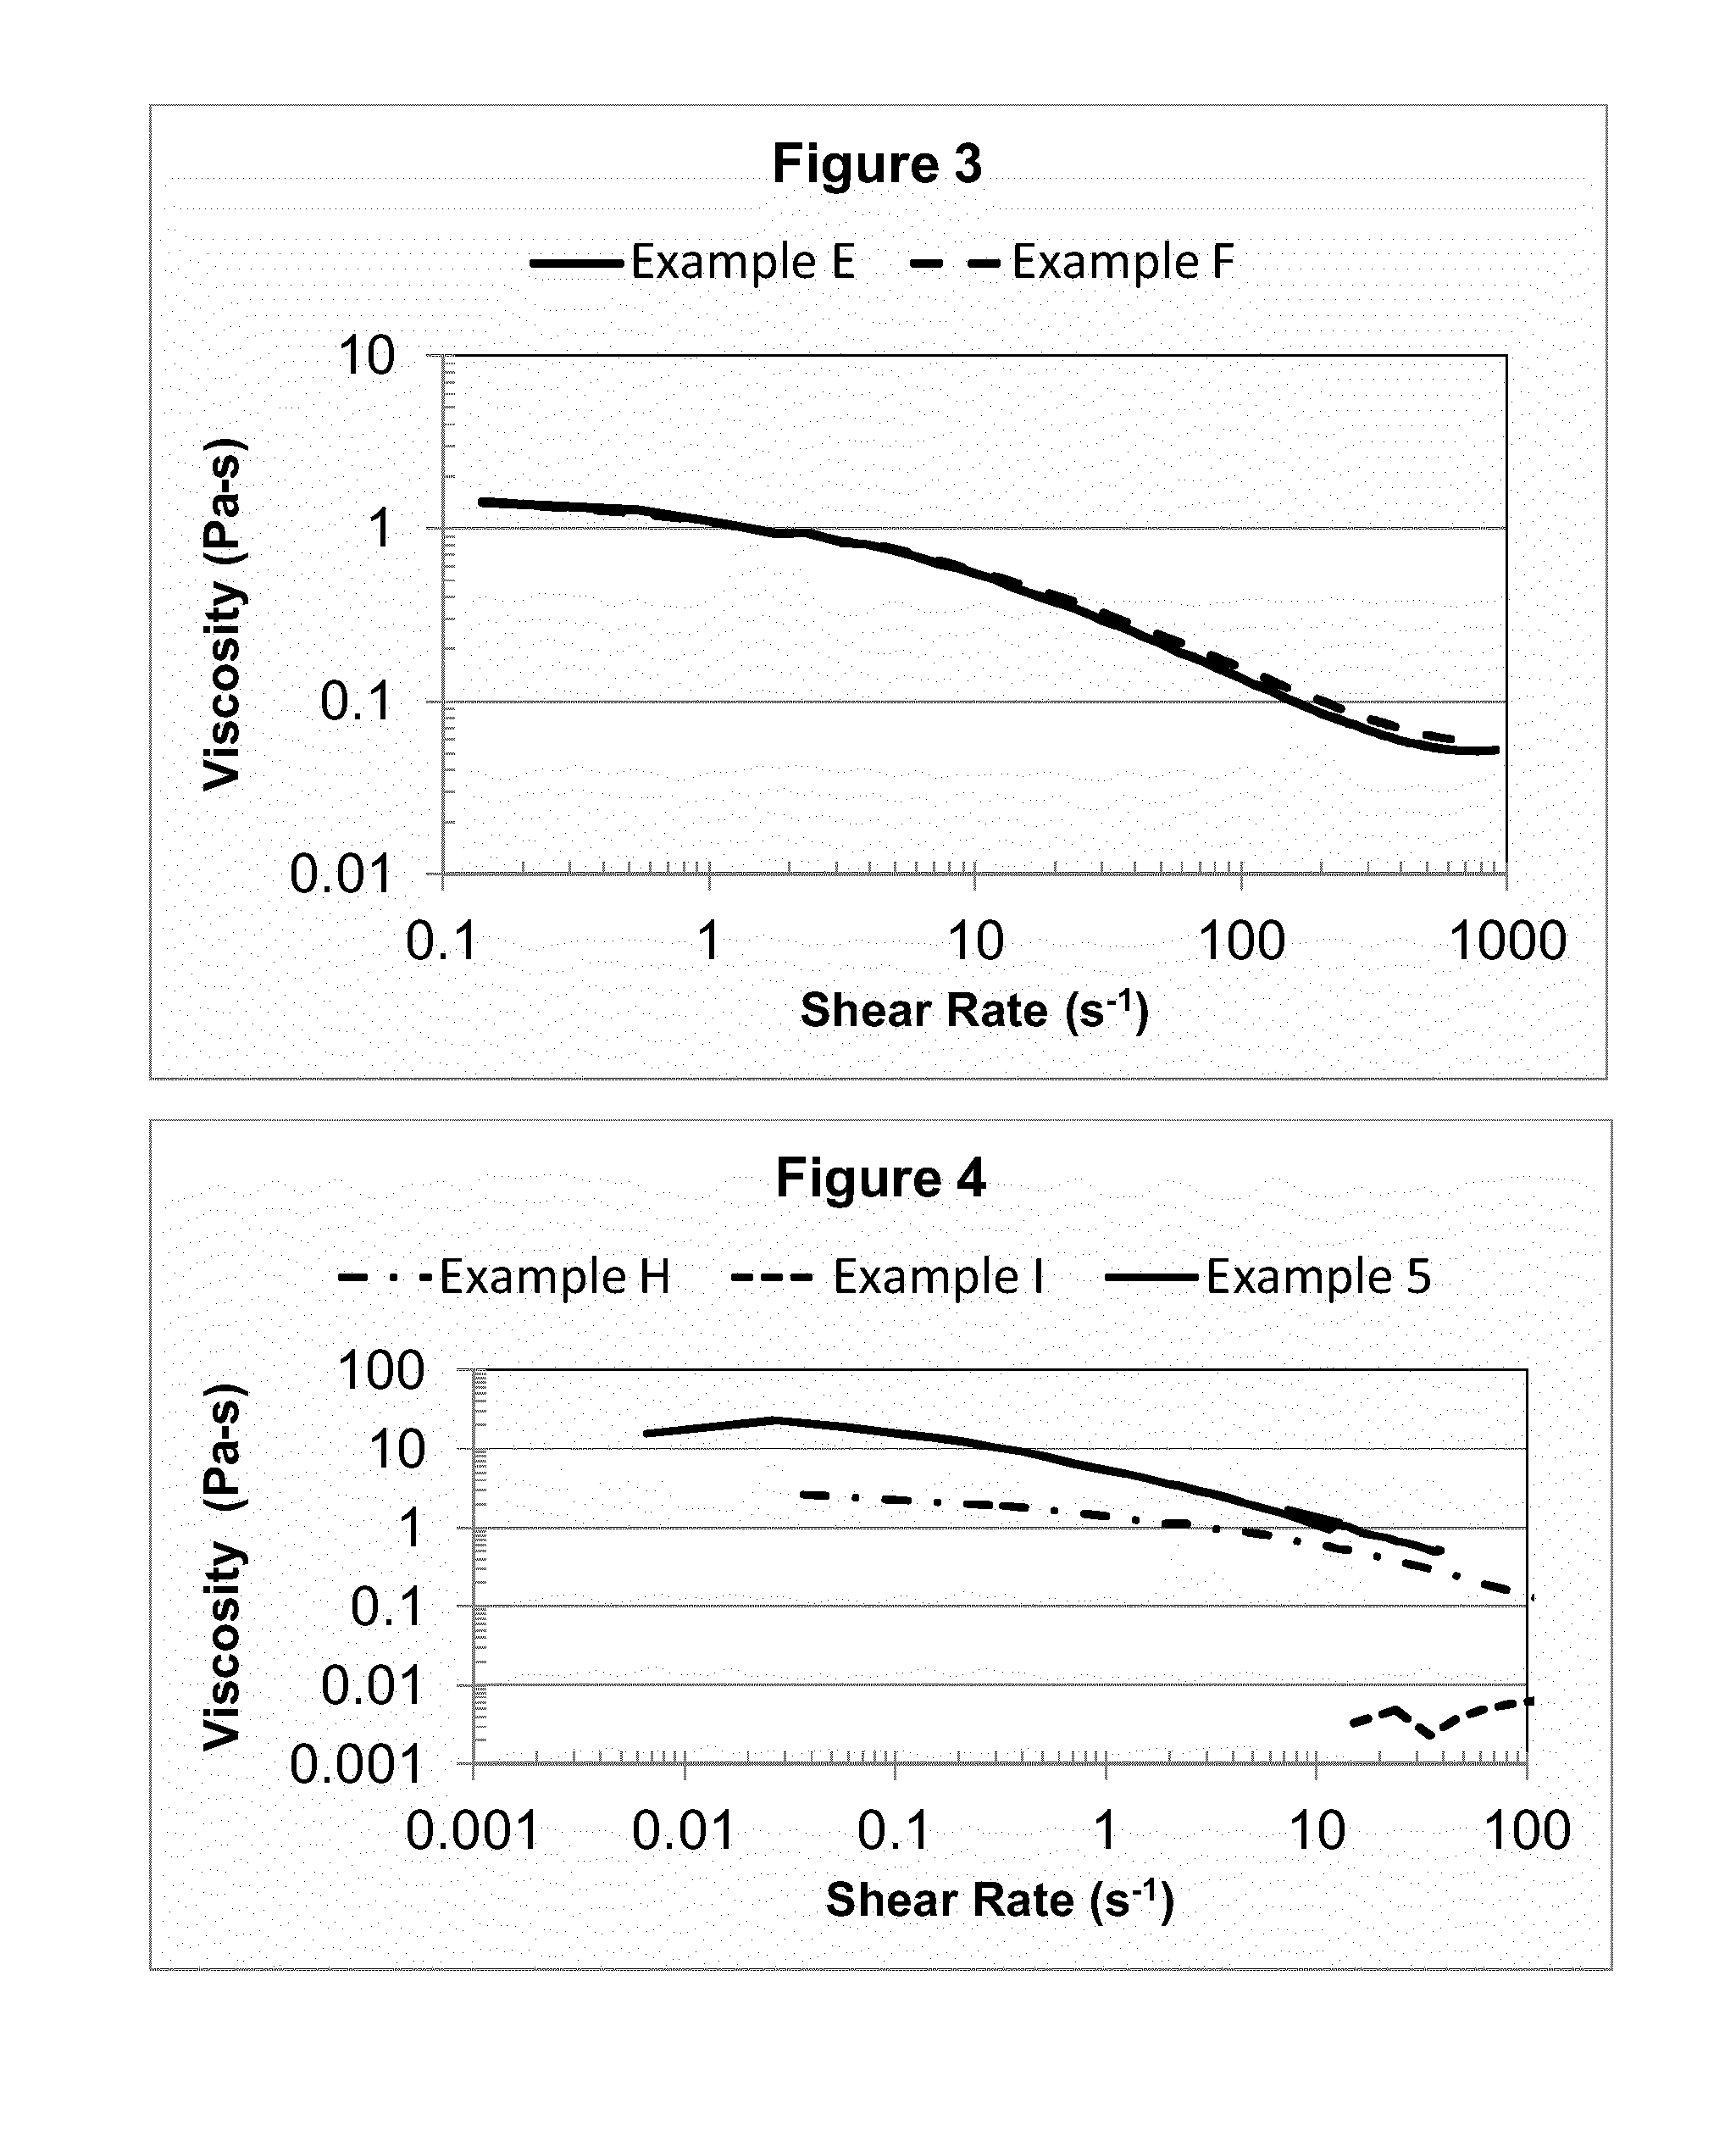 Personal care compositions including aqueous compositions of viscoelastic surfactants and hydrophobically modified polymers